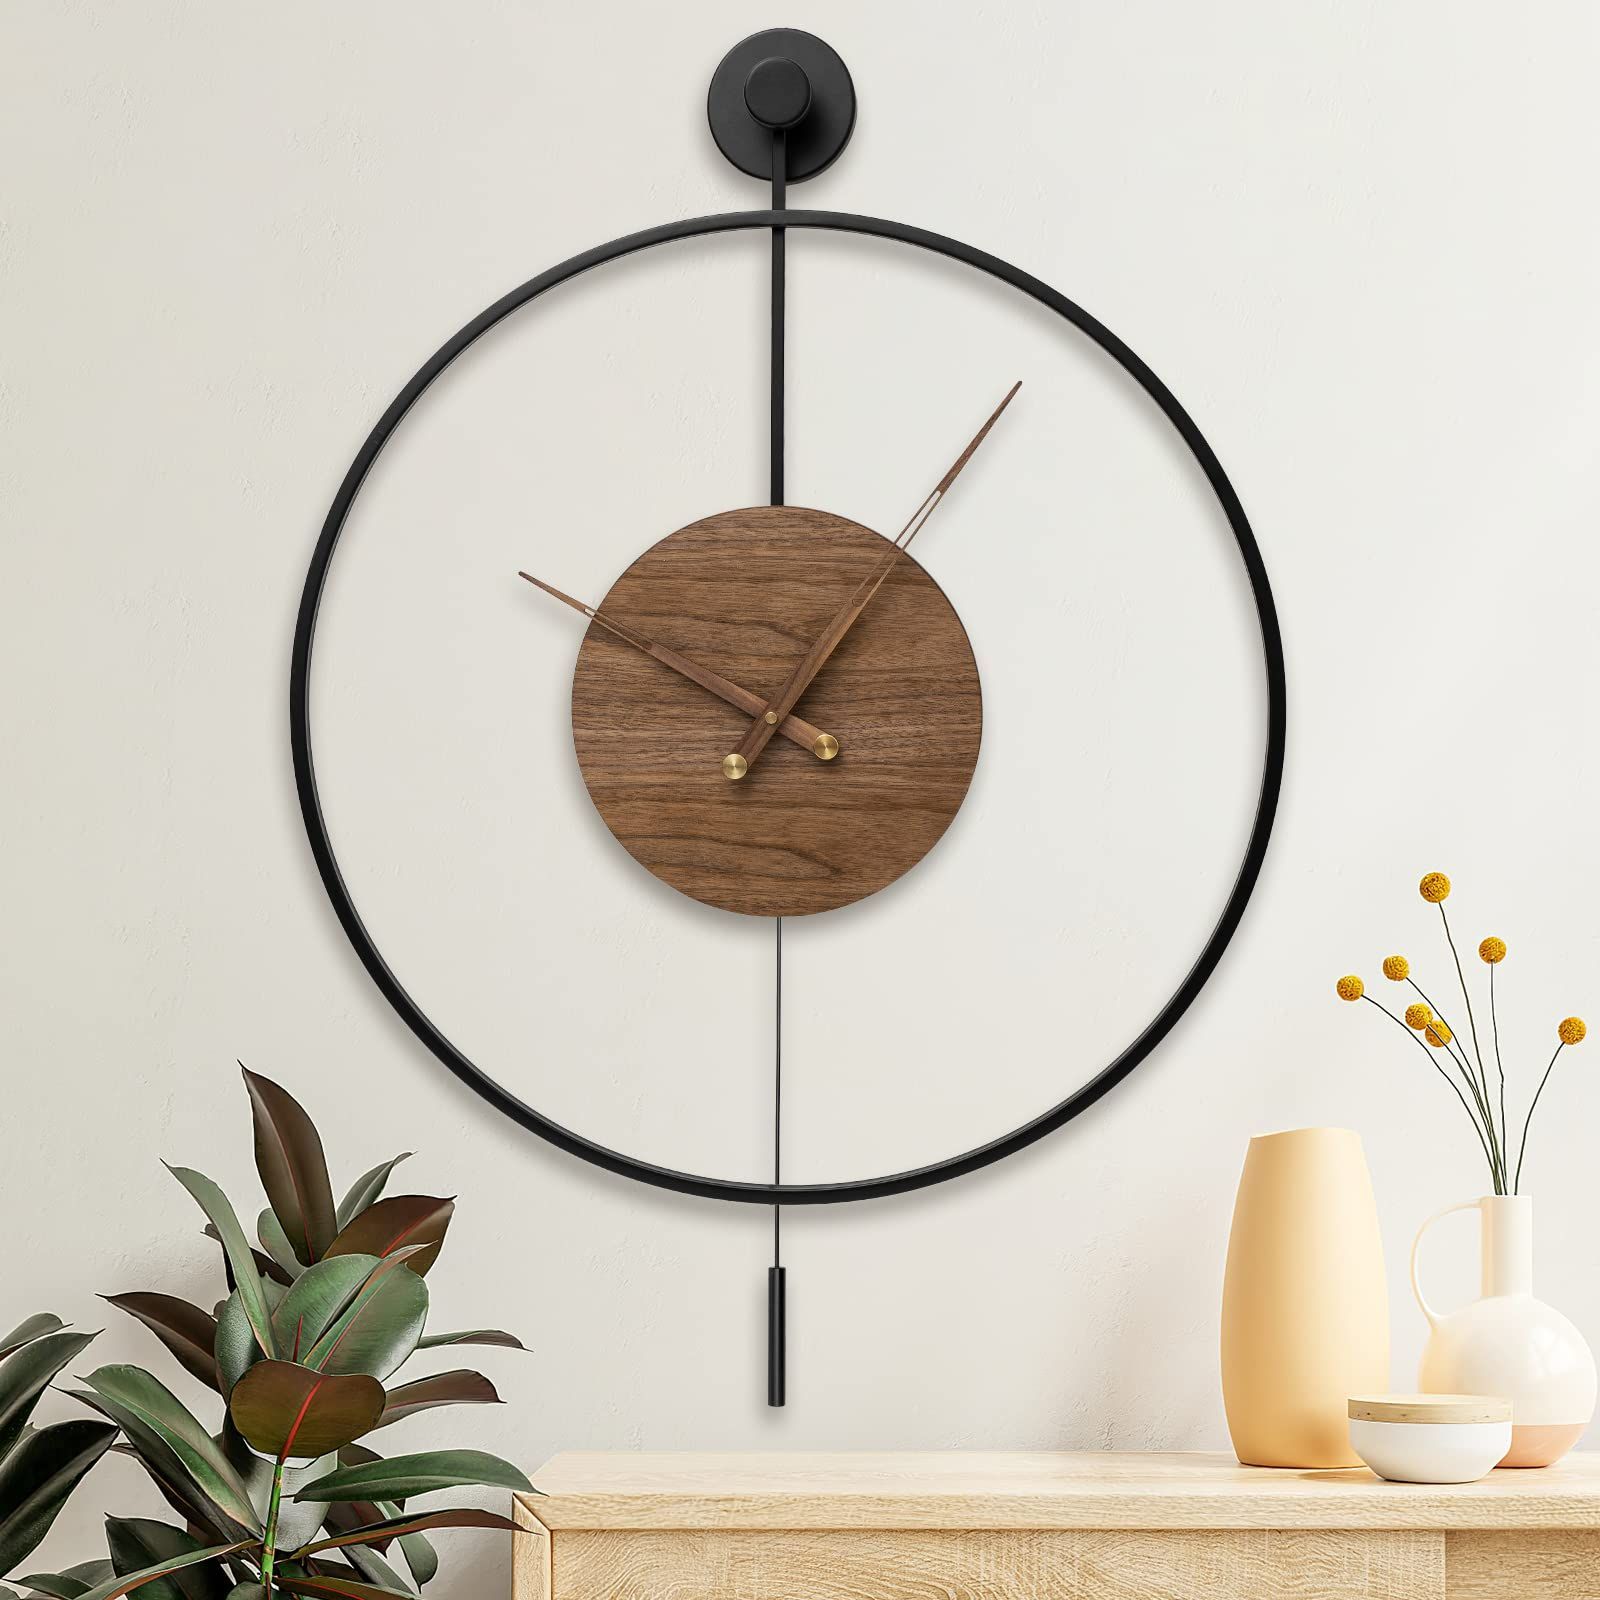 Oversized Decorative Wall Clocks: Making a Statement in Your Home